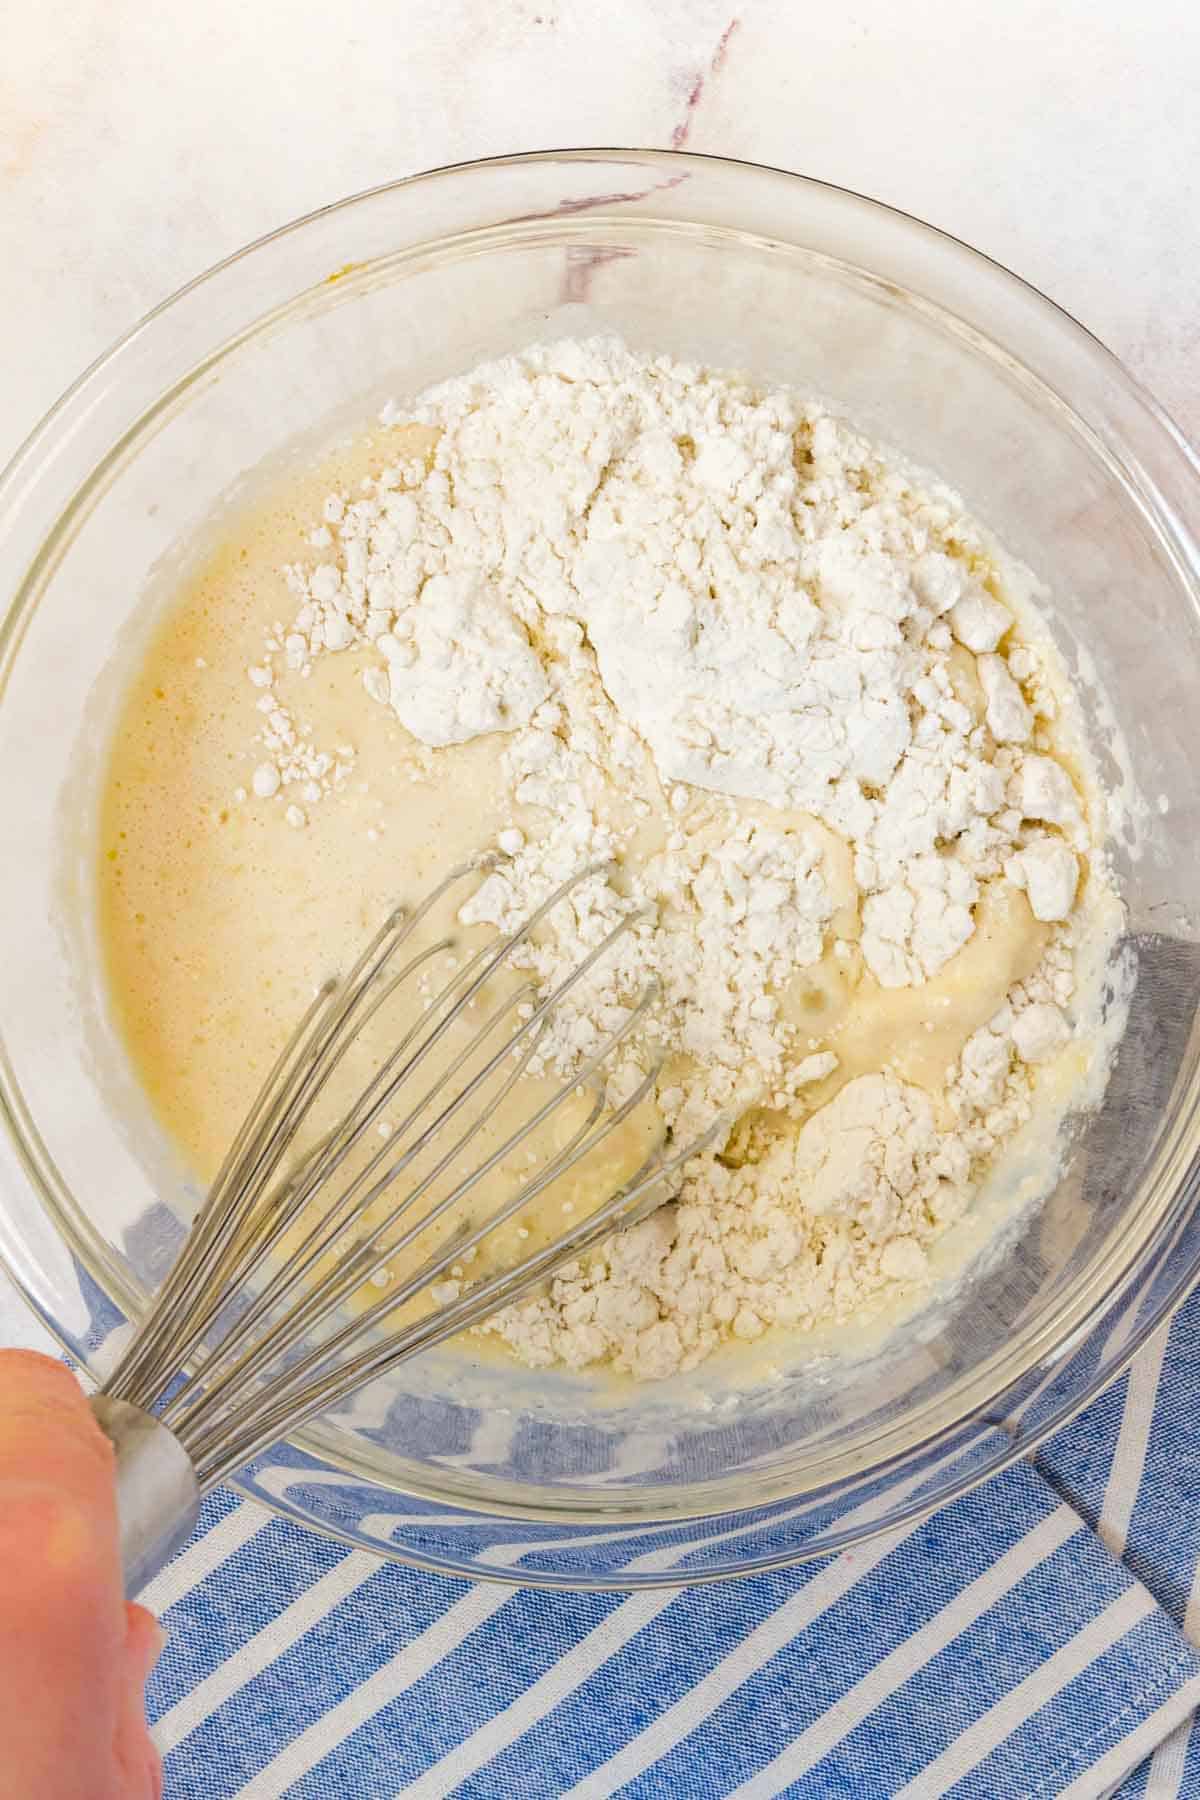 The dry ingredients are whisked together with the wet ingredients in a glass mixing bowl.